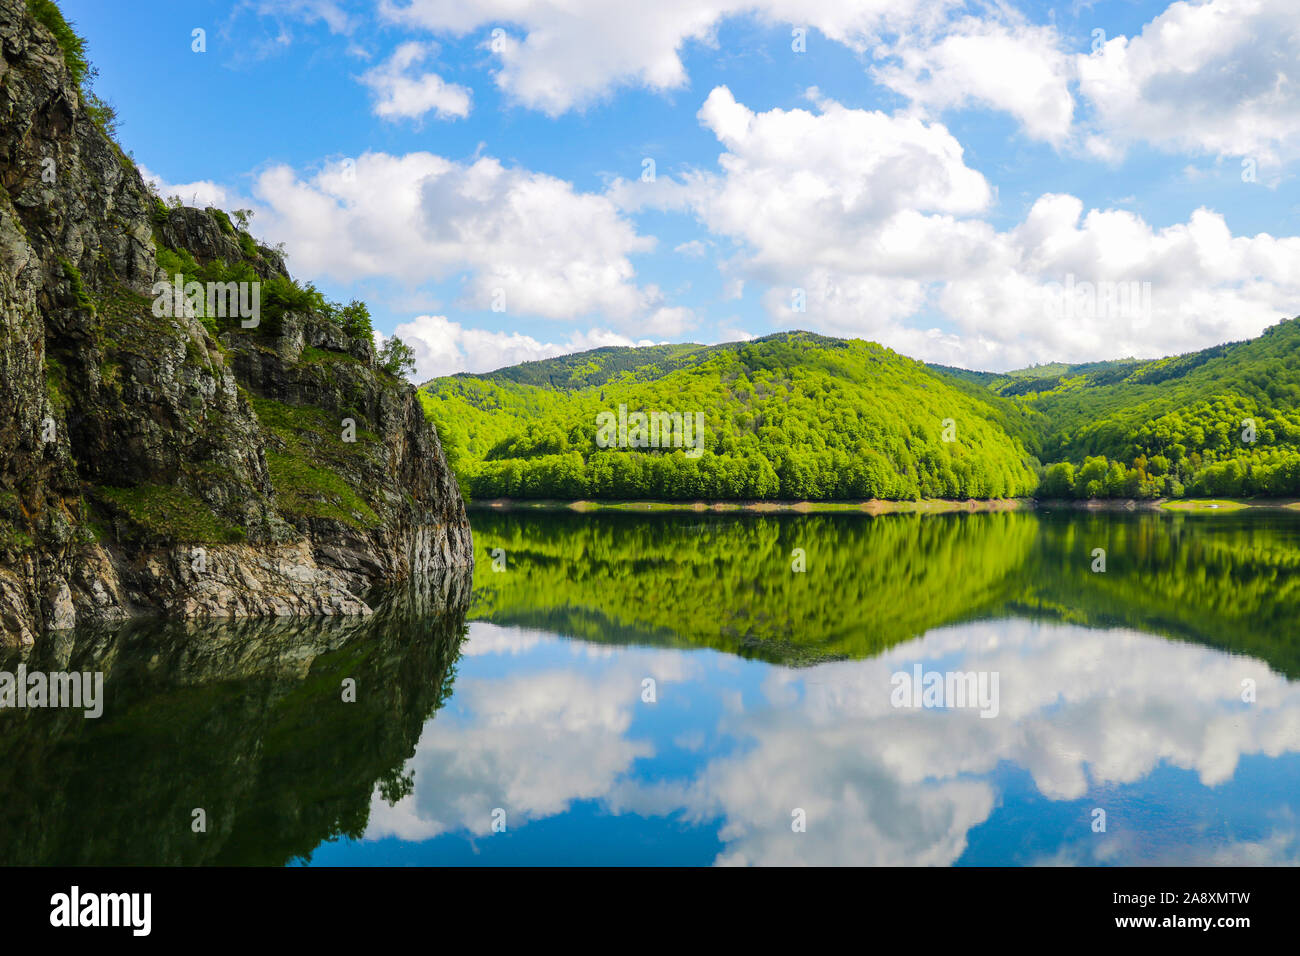 Nice view of the mountains and green hills. Reflection of hills in a lake Stock Photo